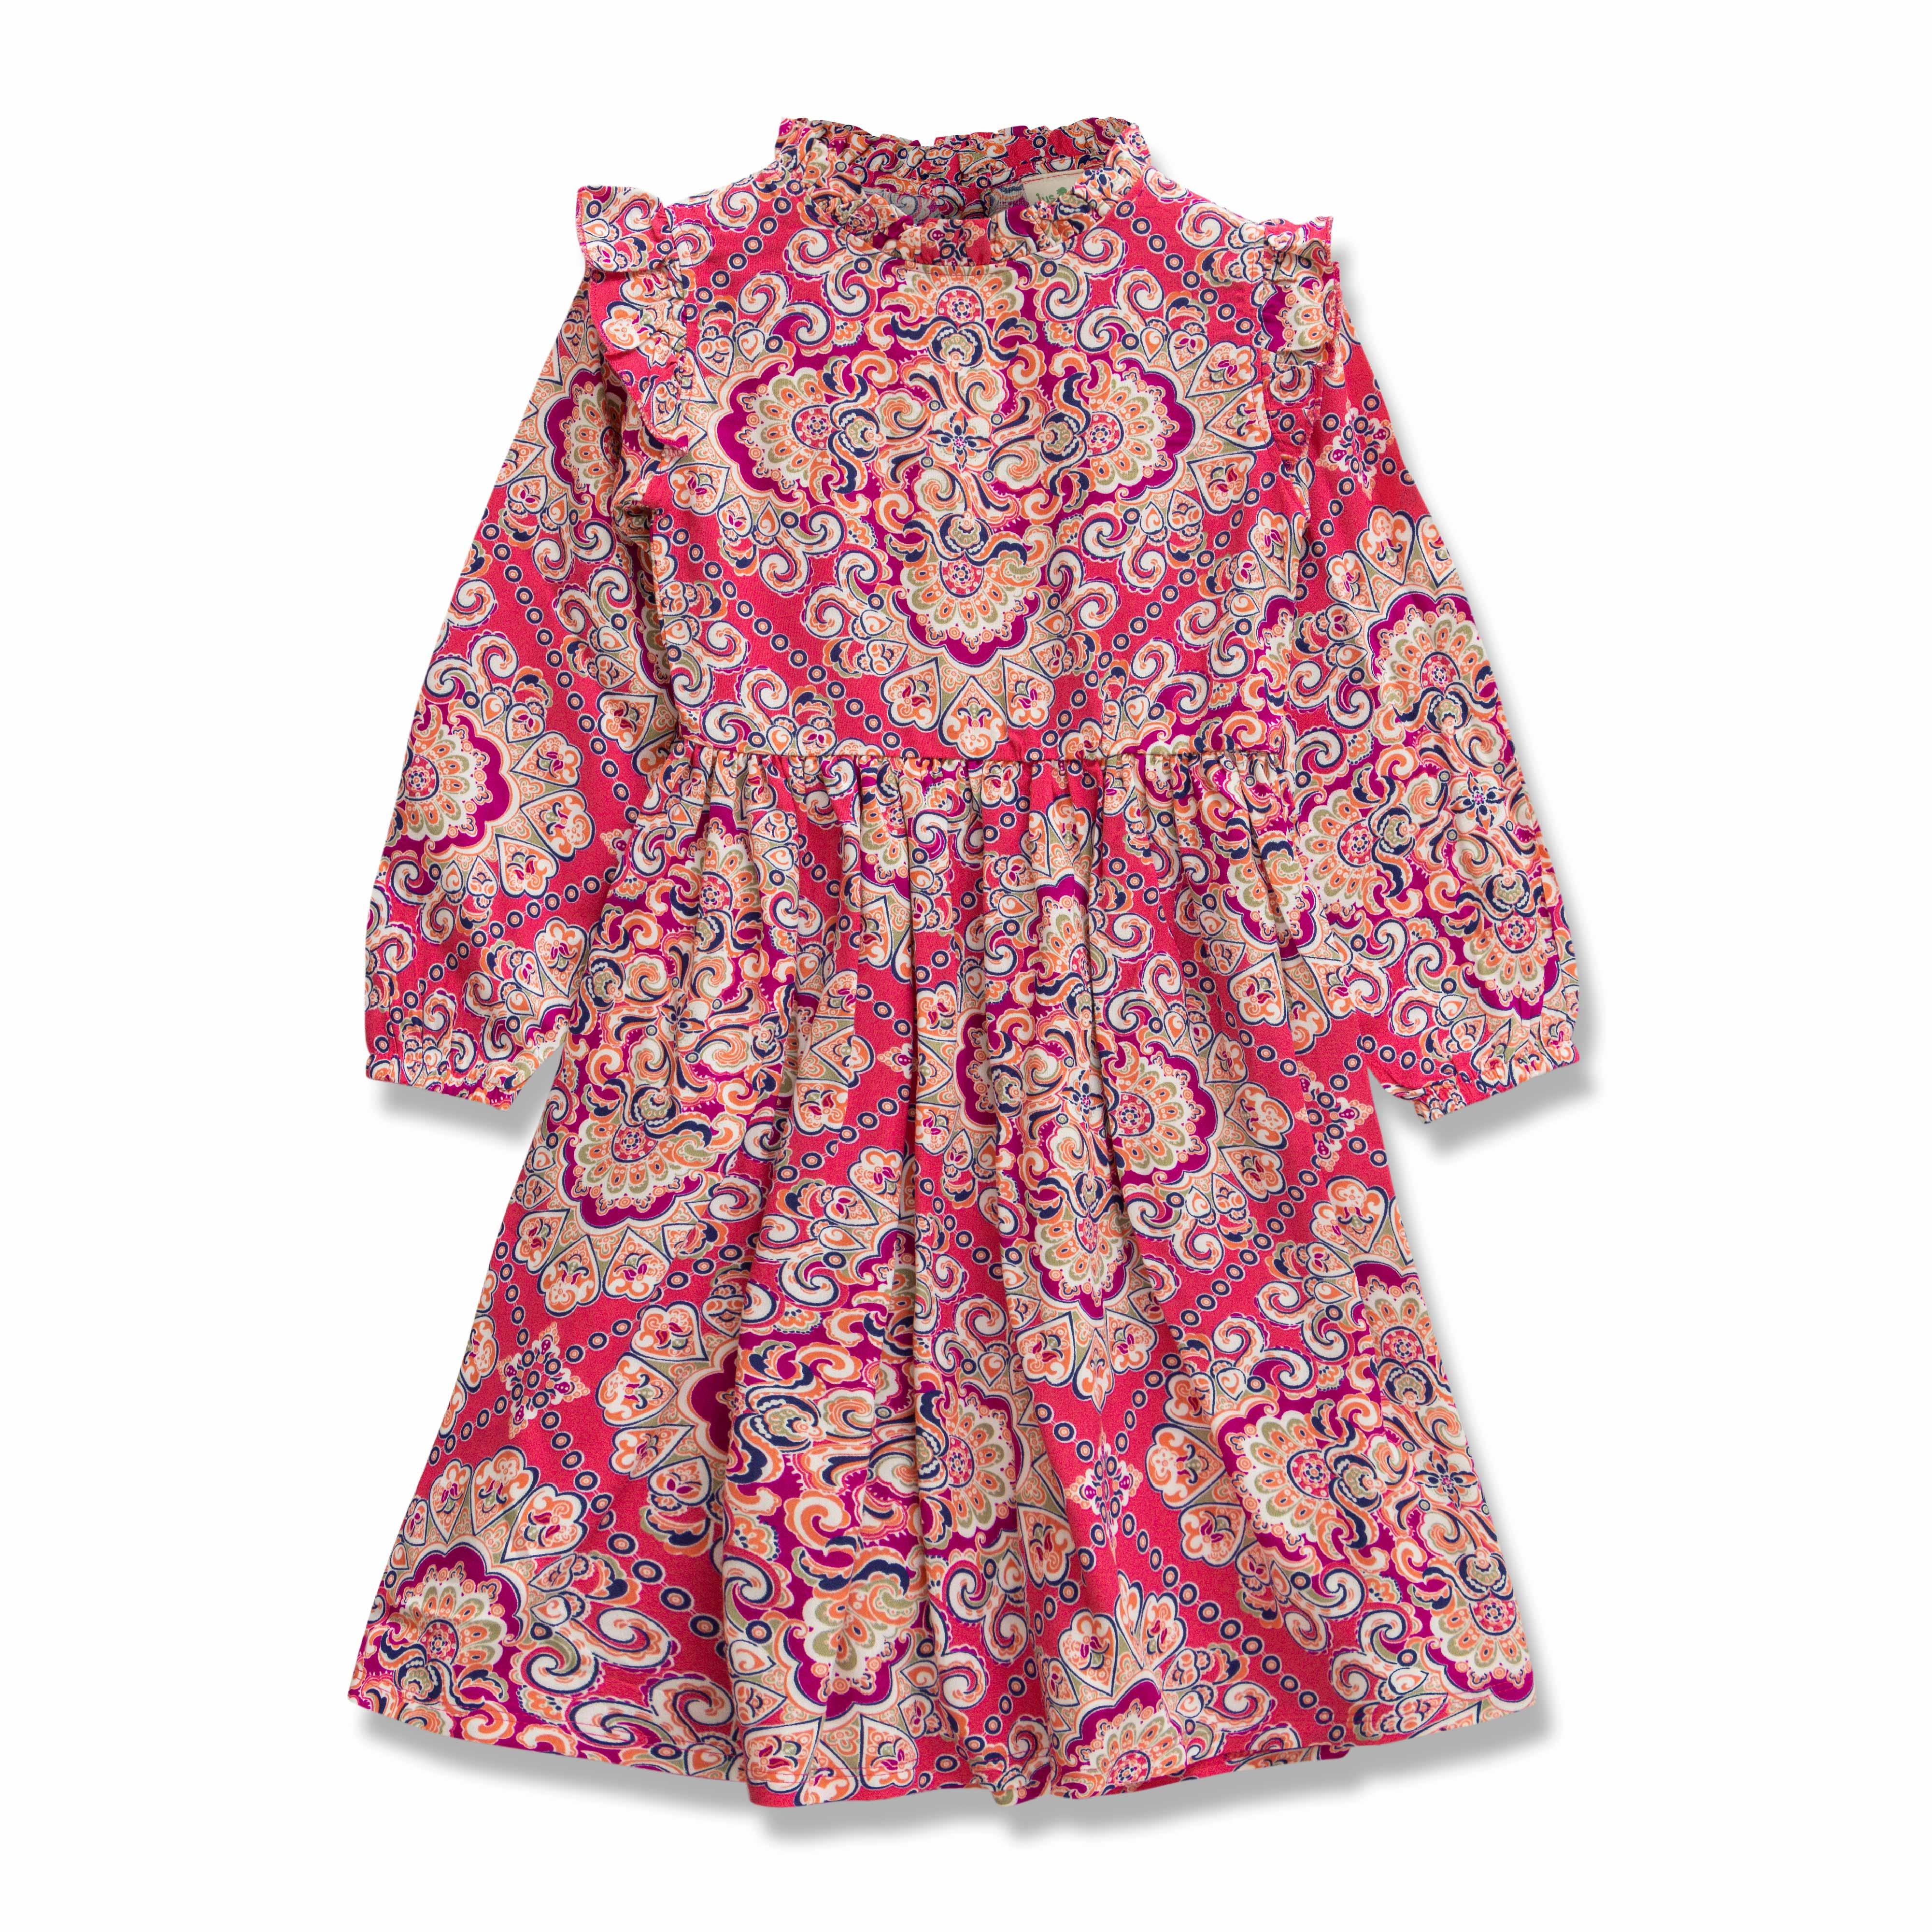 Baby Girls All Over Printed Fit & Flare Dress